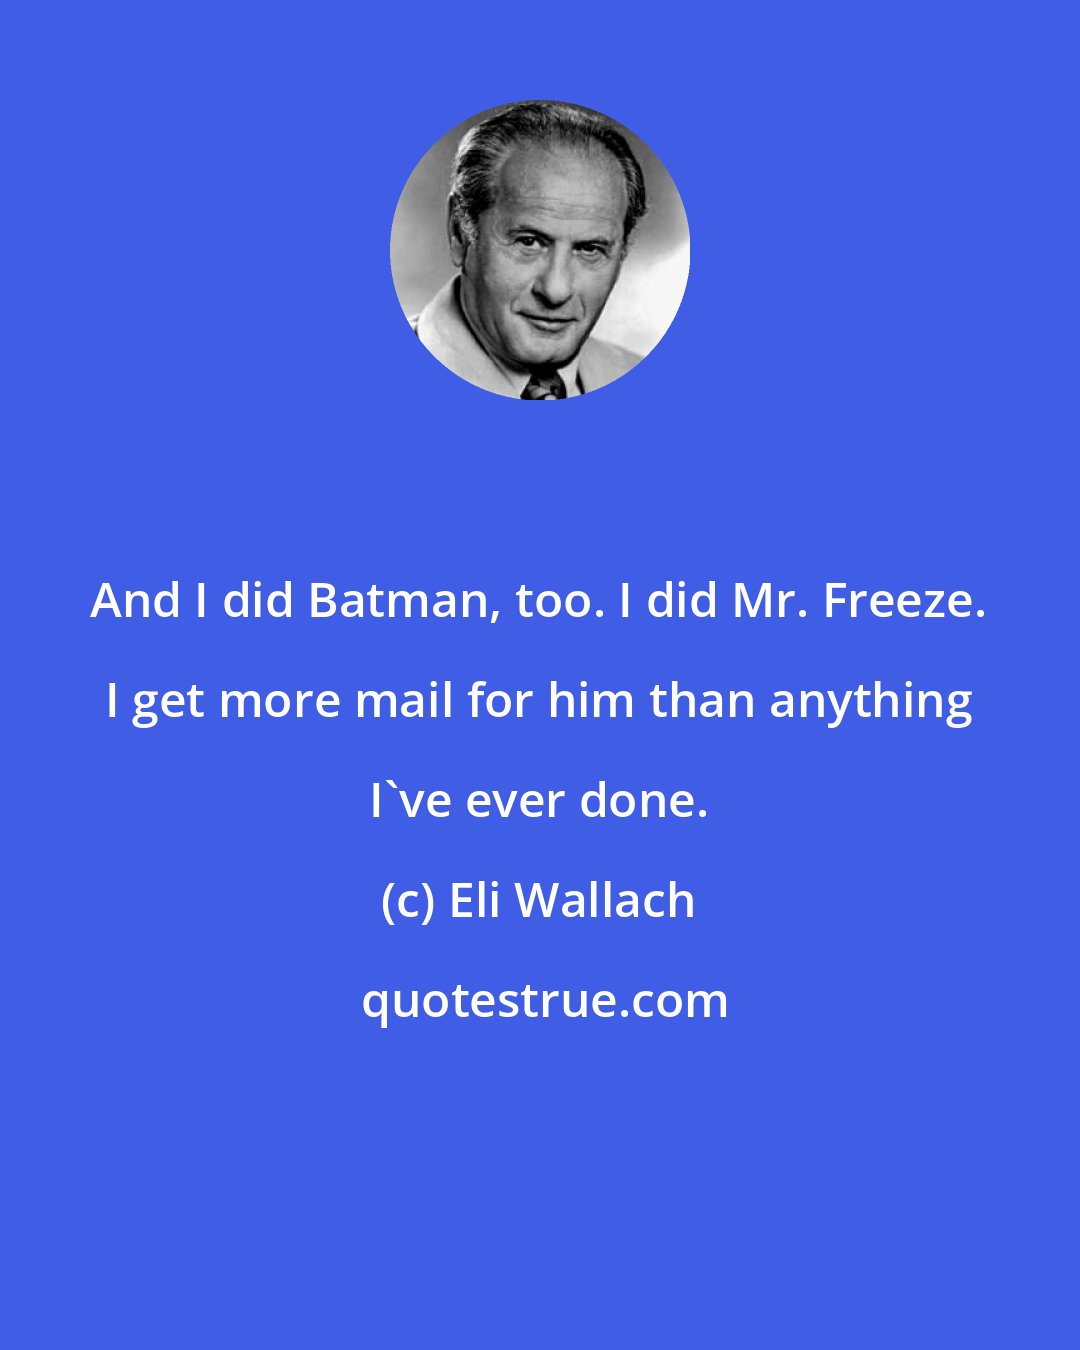 Eli Wallach: And I did Batman, too. I did Mr. Freeze. I get more mail for him than anything I've ever done.